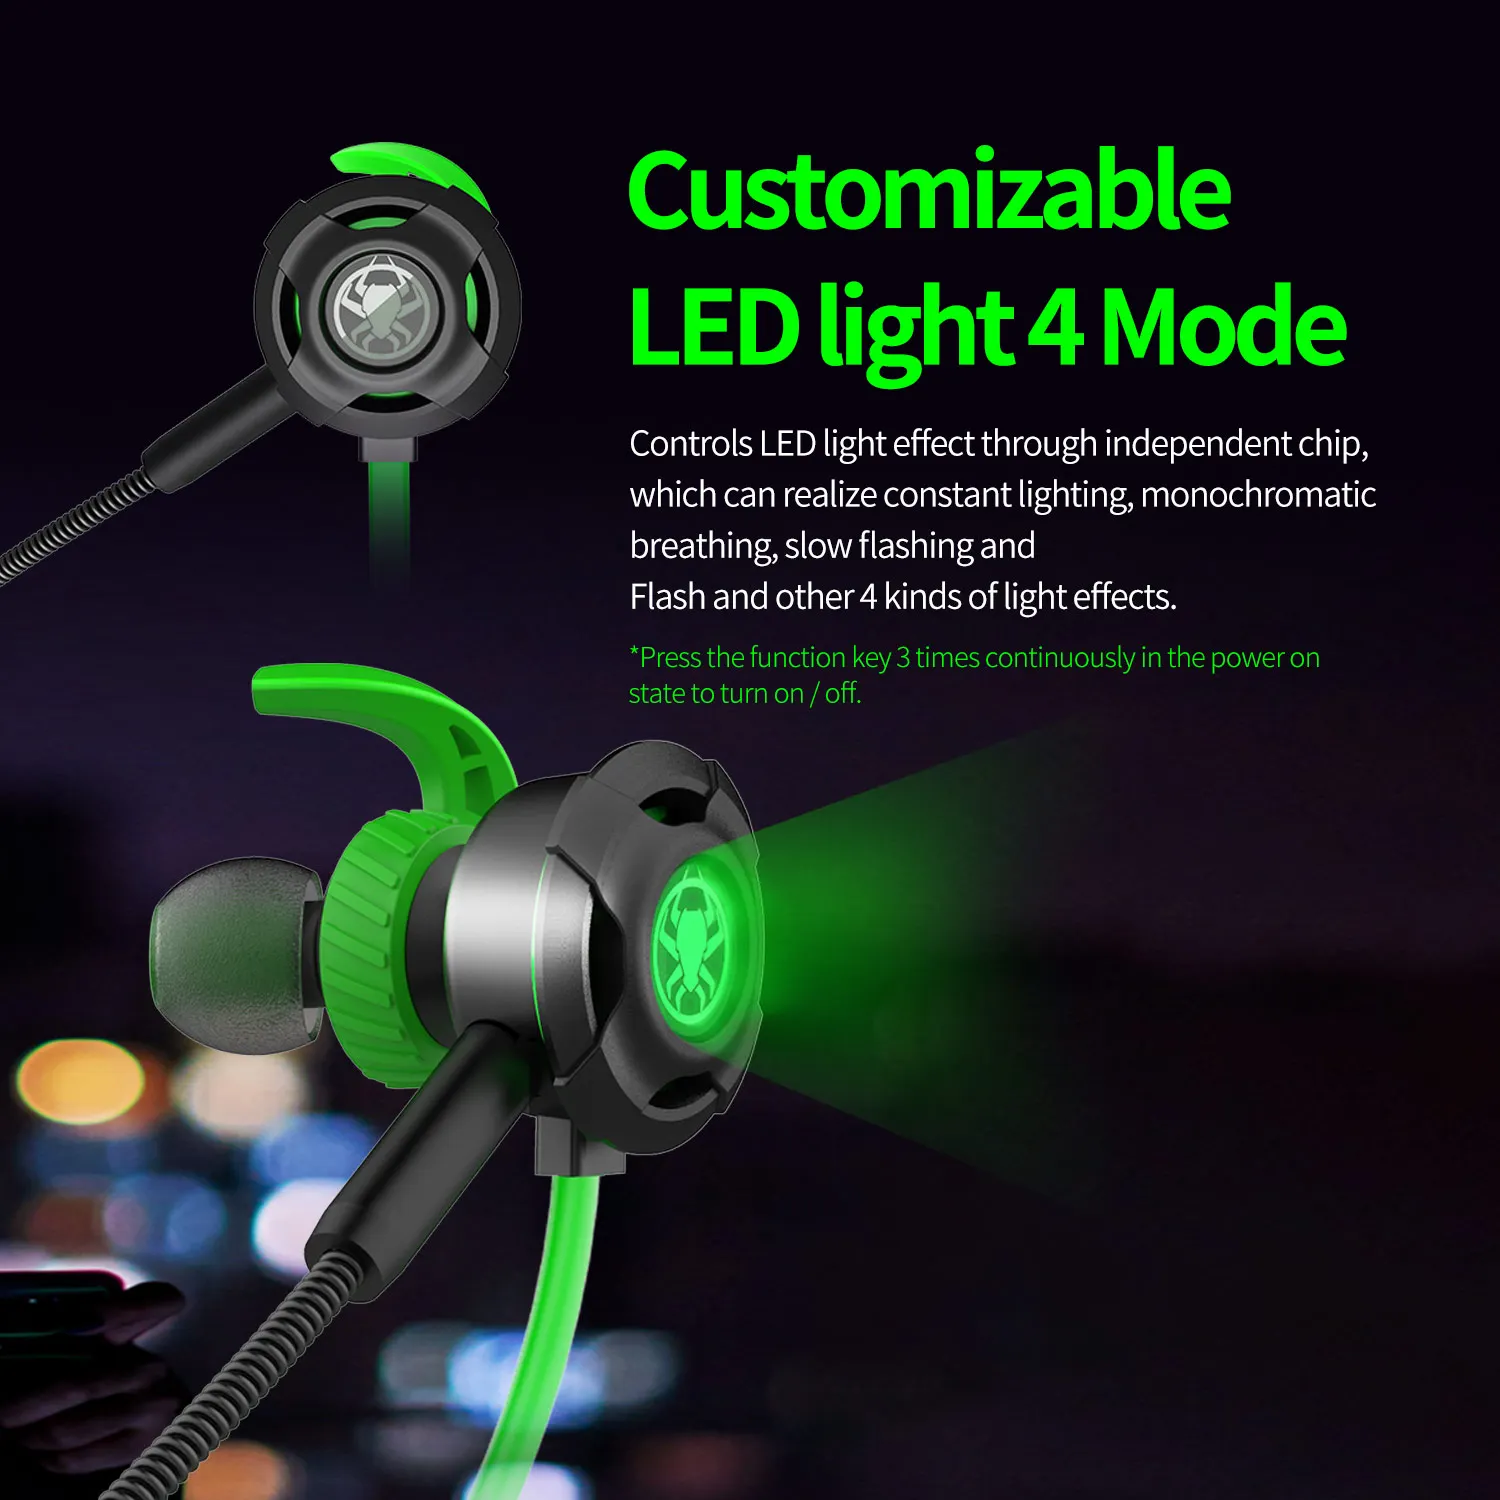 Plextone Wireless Headphones Neckband Low Latency Gaming In-ear Led Lighting Earphone With Detachable Mic Quick Charge 7.1ch - Buy Gaming Wireless Earphone,7.1ch Gaming Earbuds,Low Latency Earphones Product on Alibaba.com